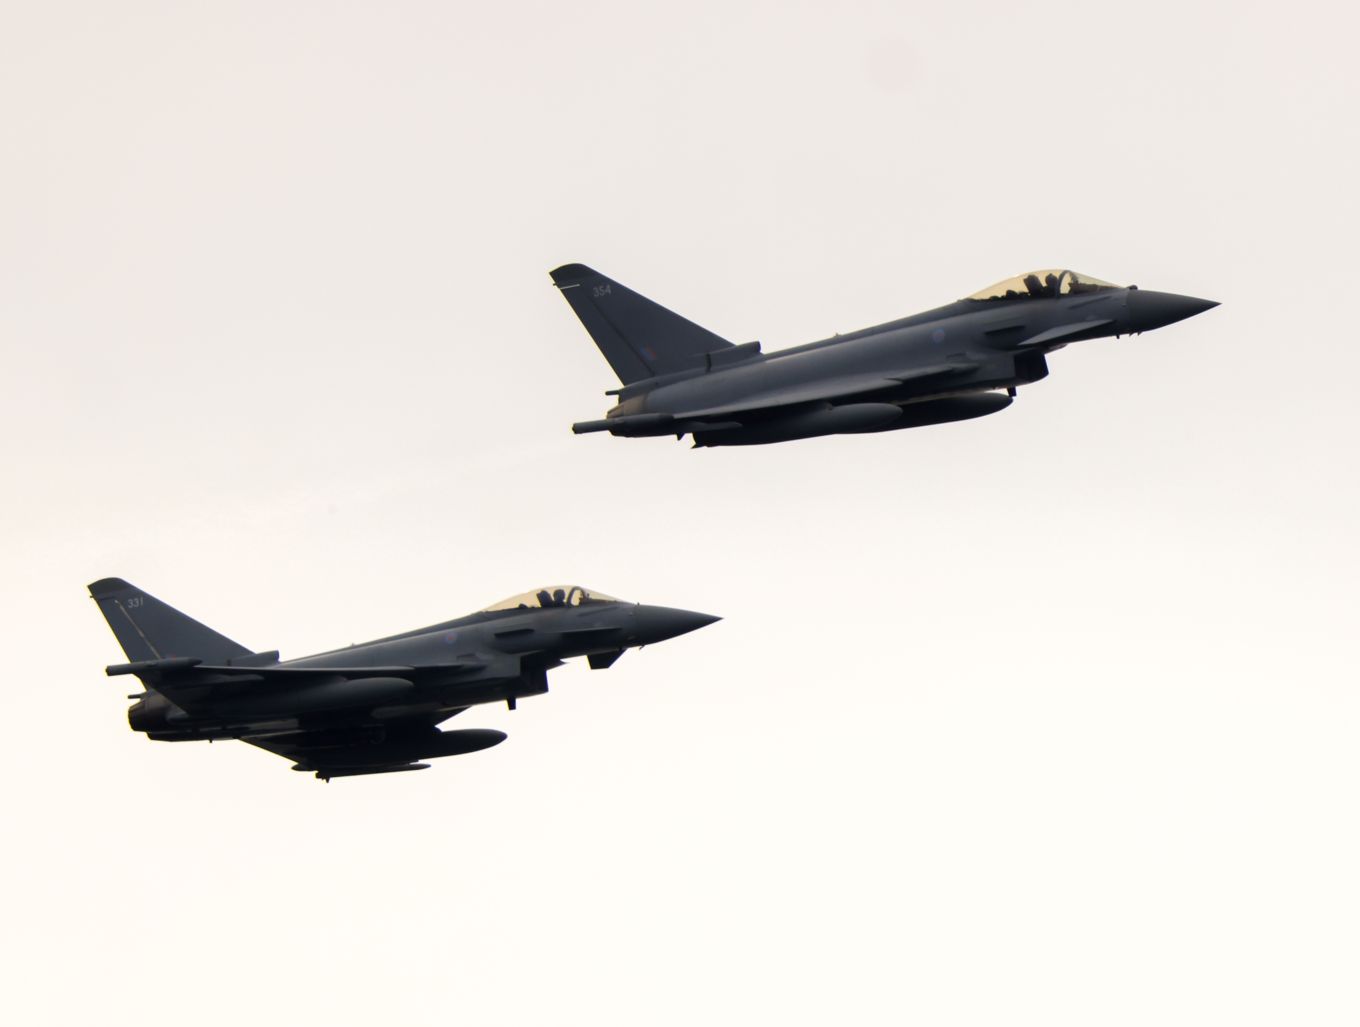 Two Typhoon fighters.